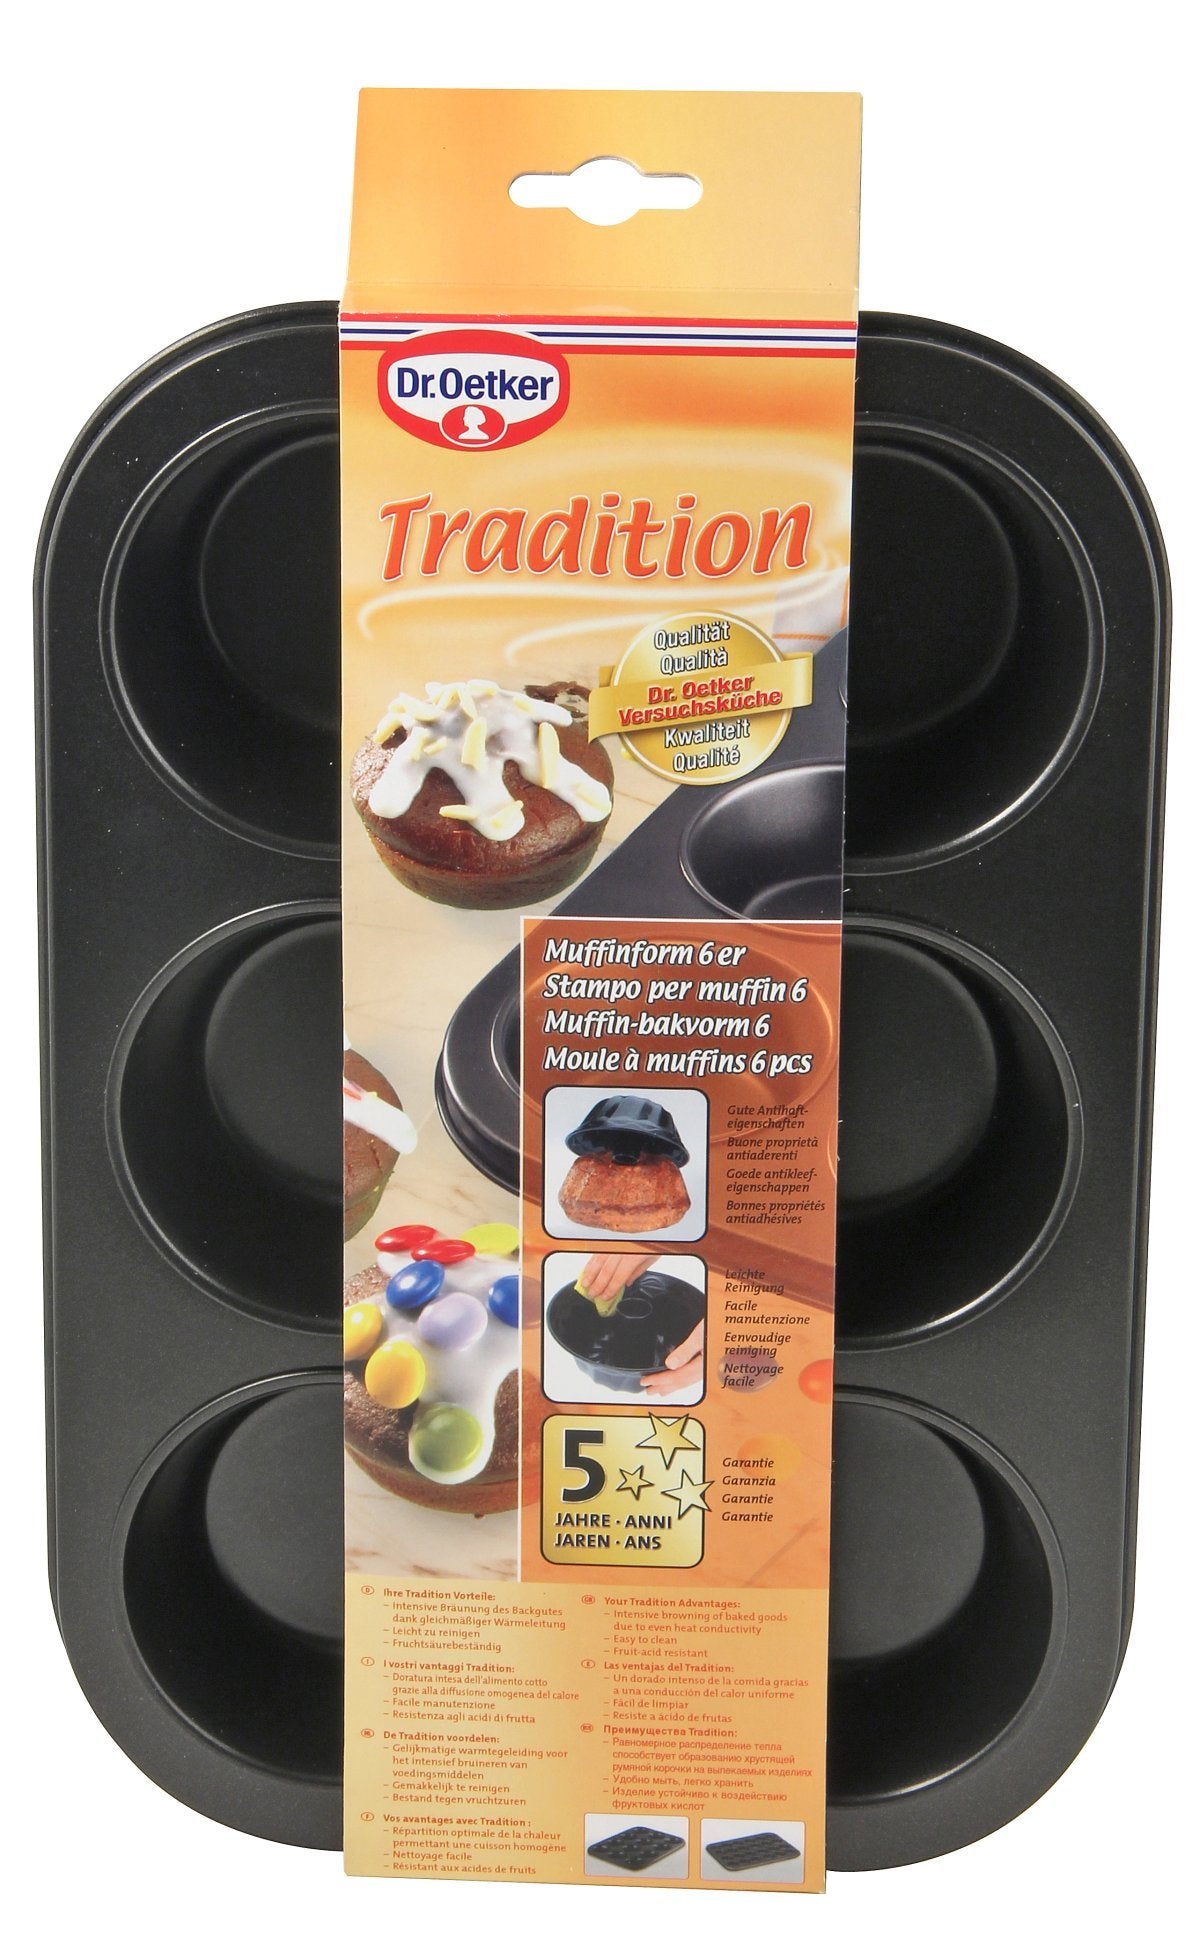 Dr.Oetker "Tradition" Muffin Tin 6 Cups, Black